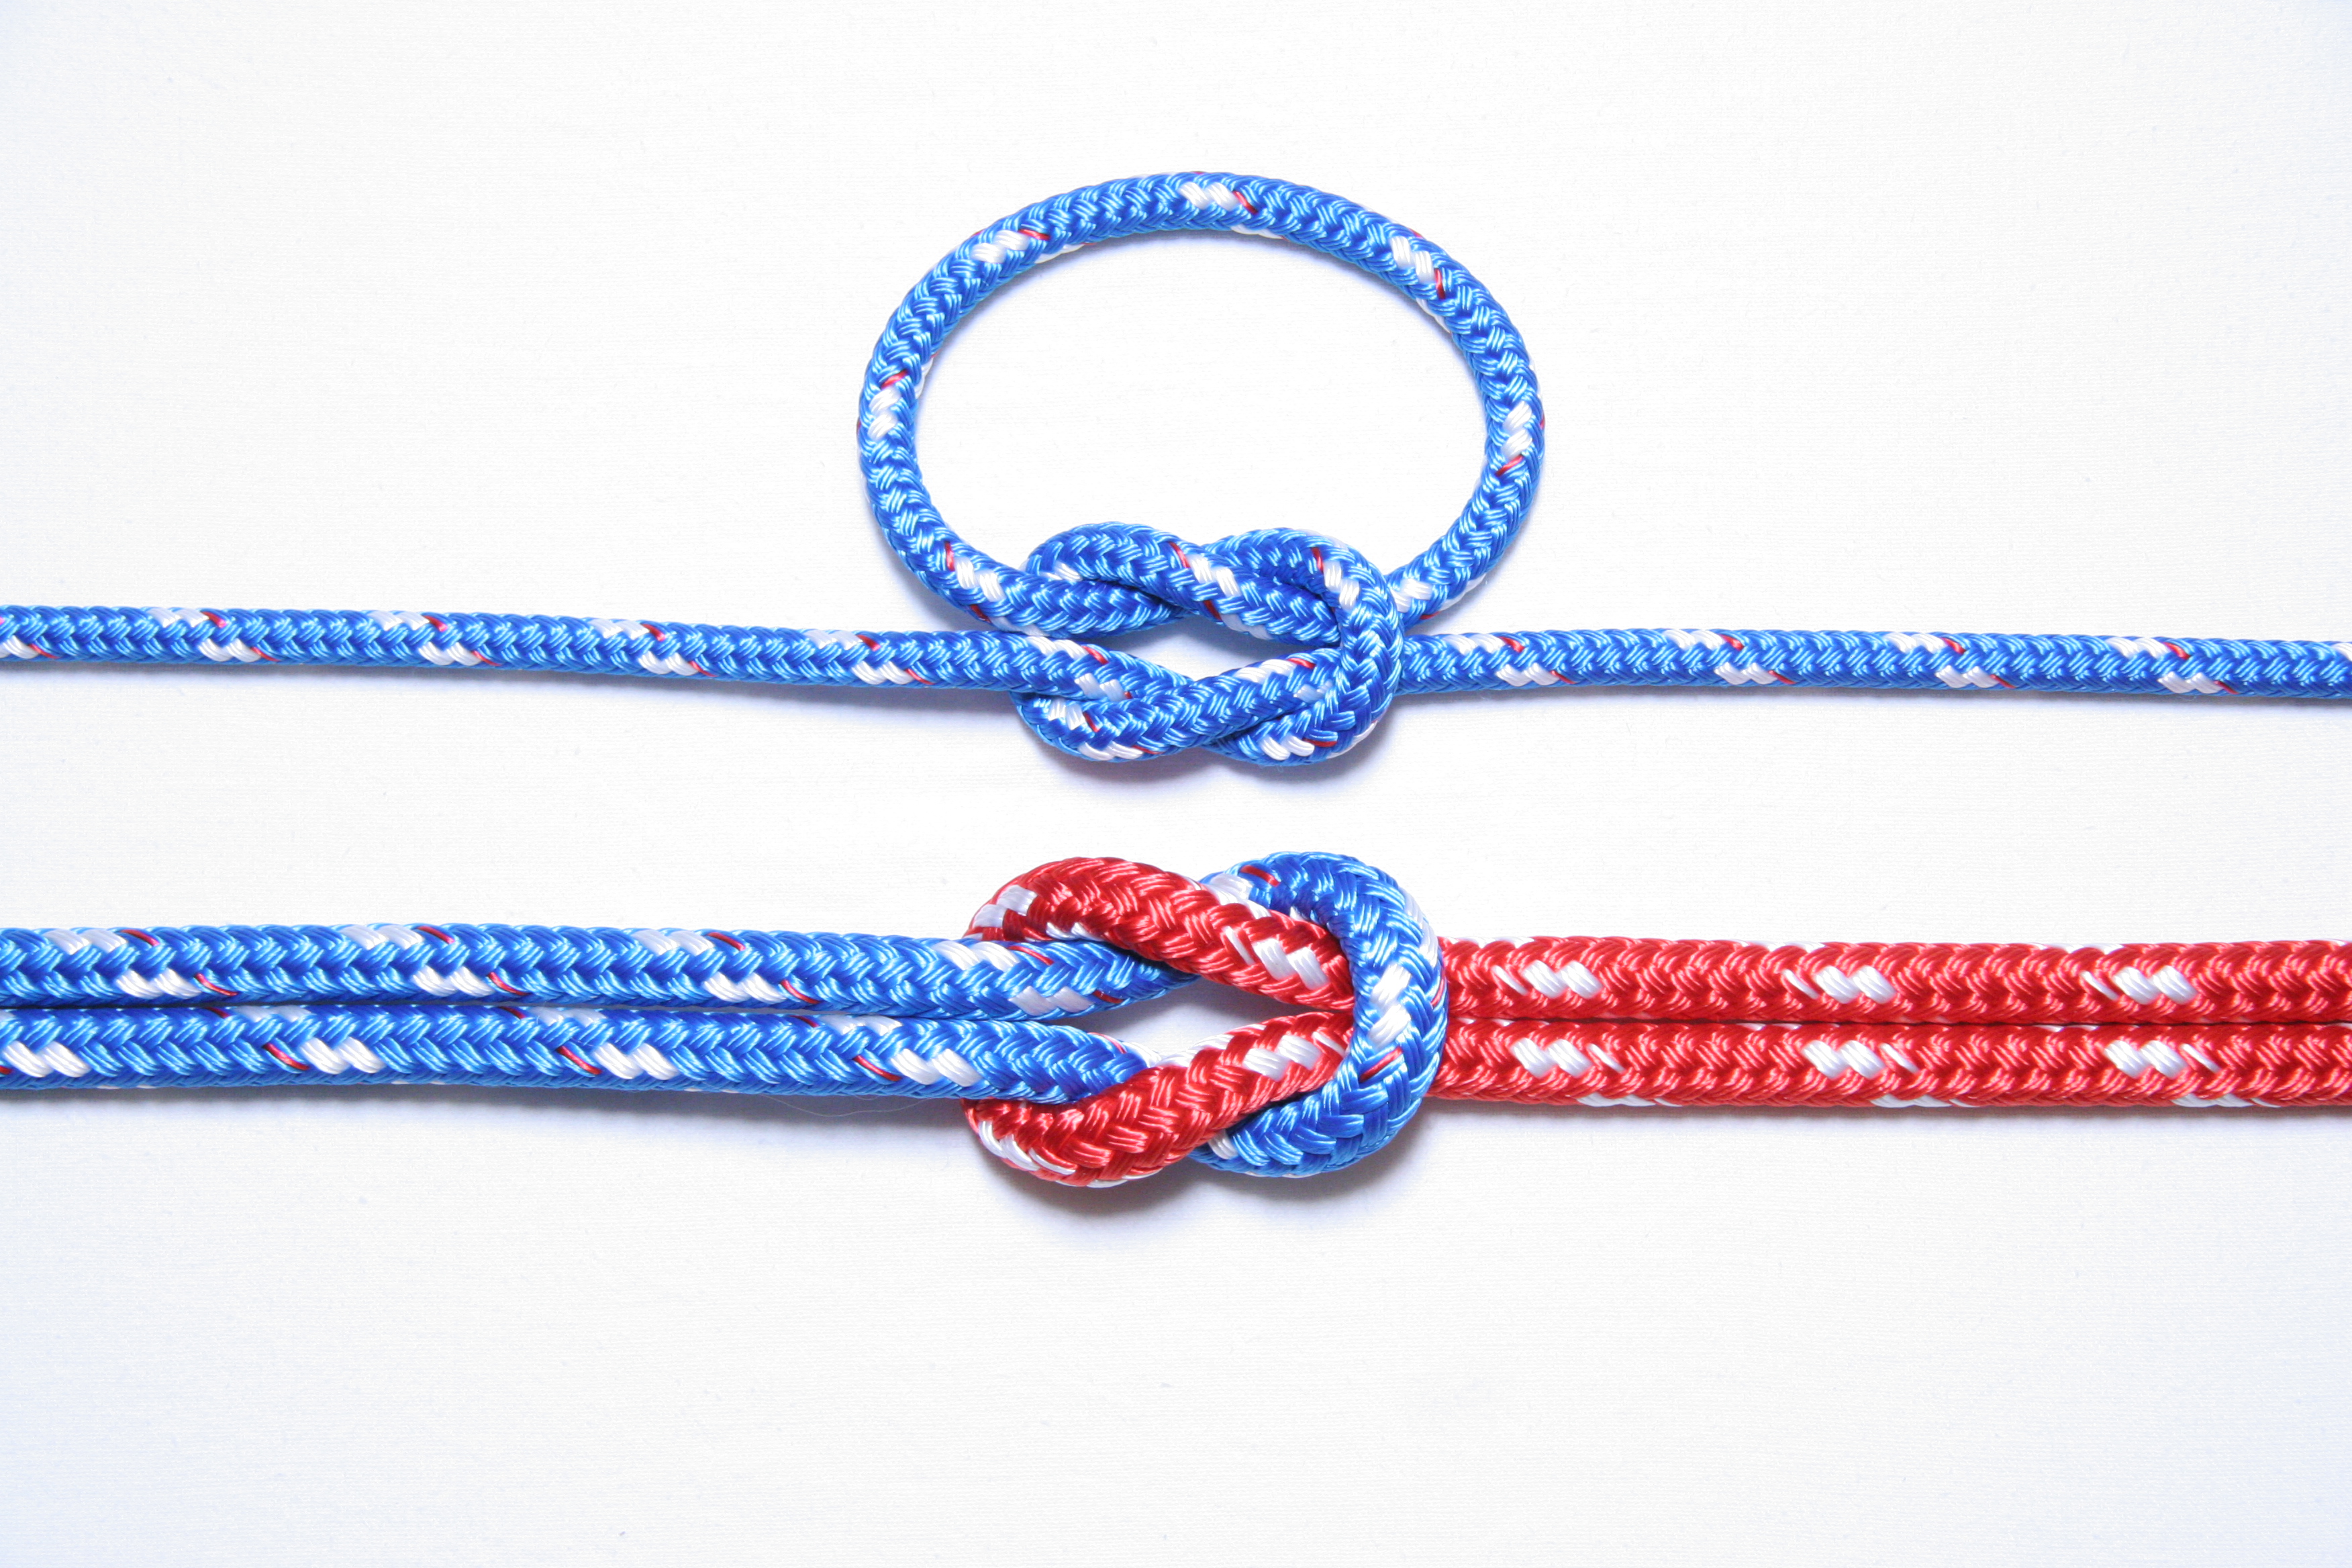 A square knot